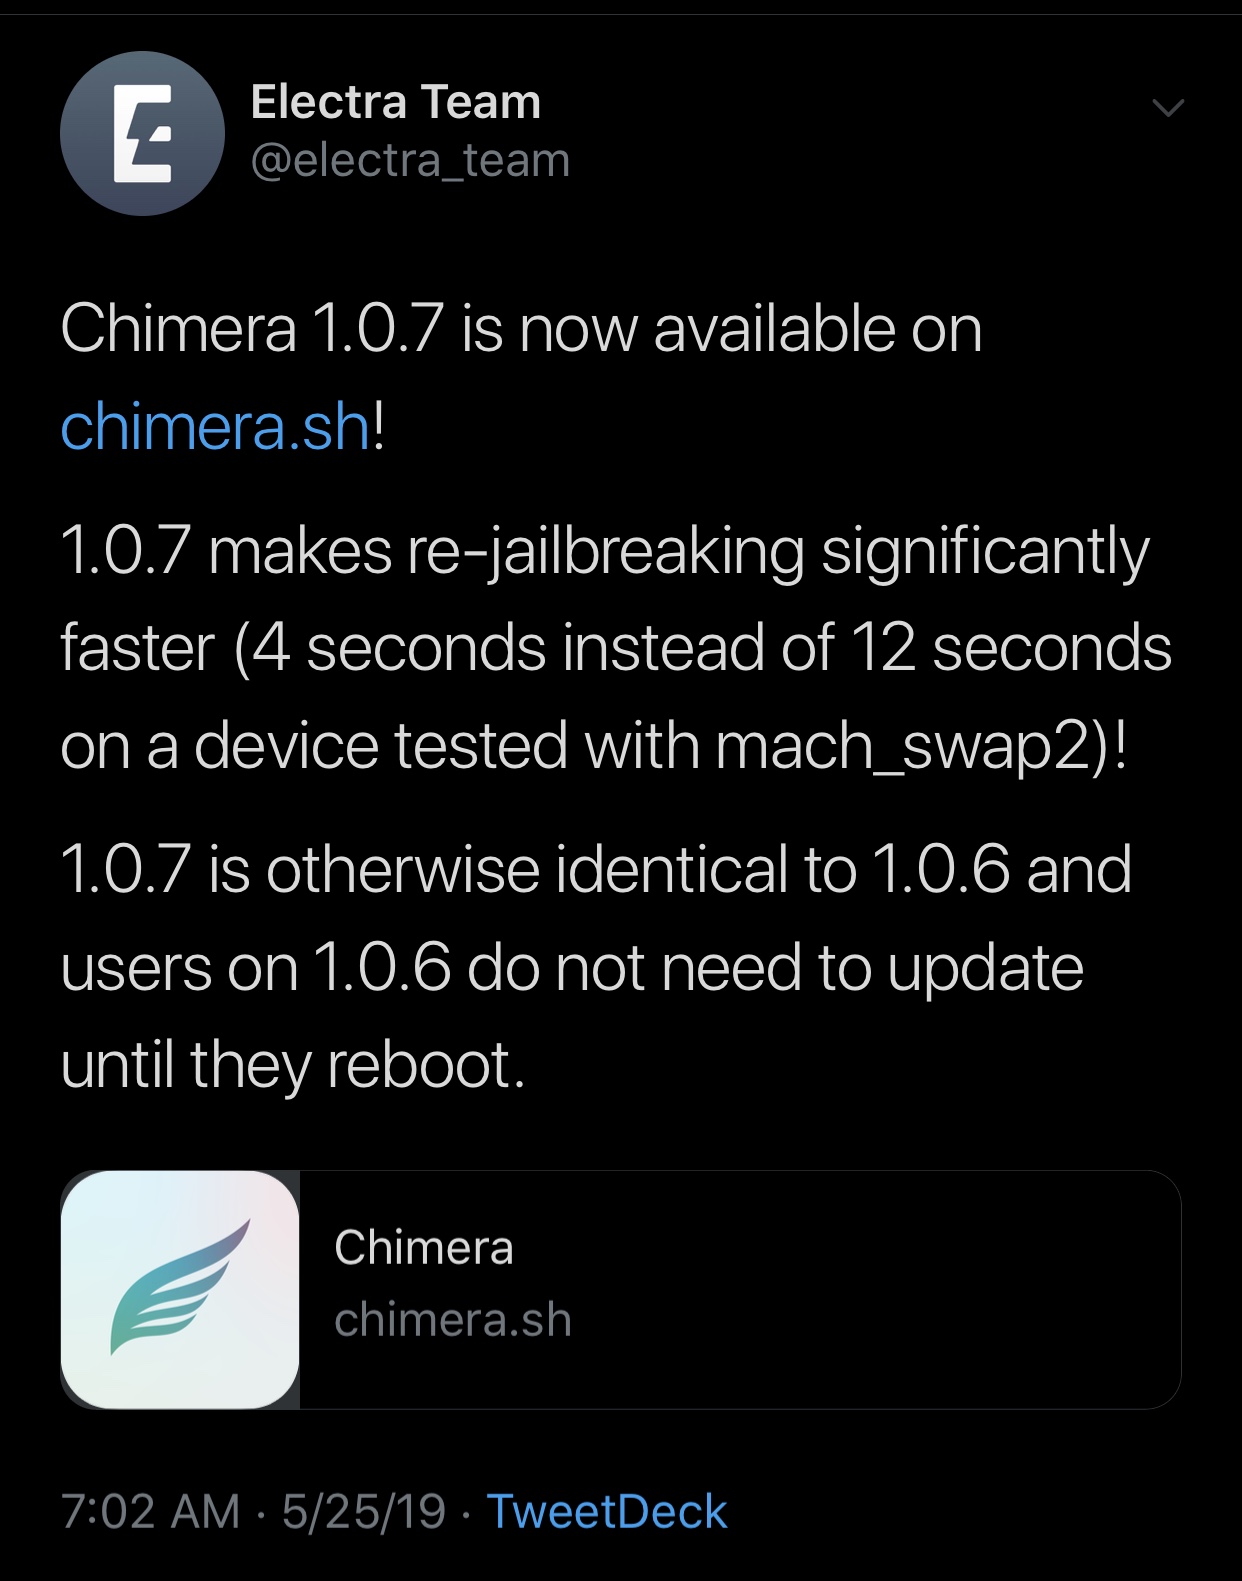 Electra Team Releases Chimera V1 0 7 With A Faster Jailbreak Process